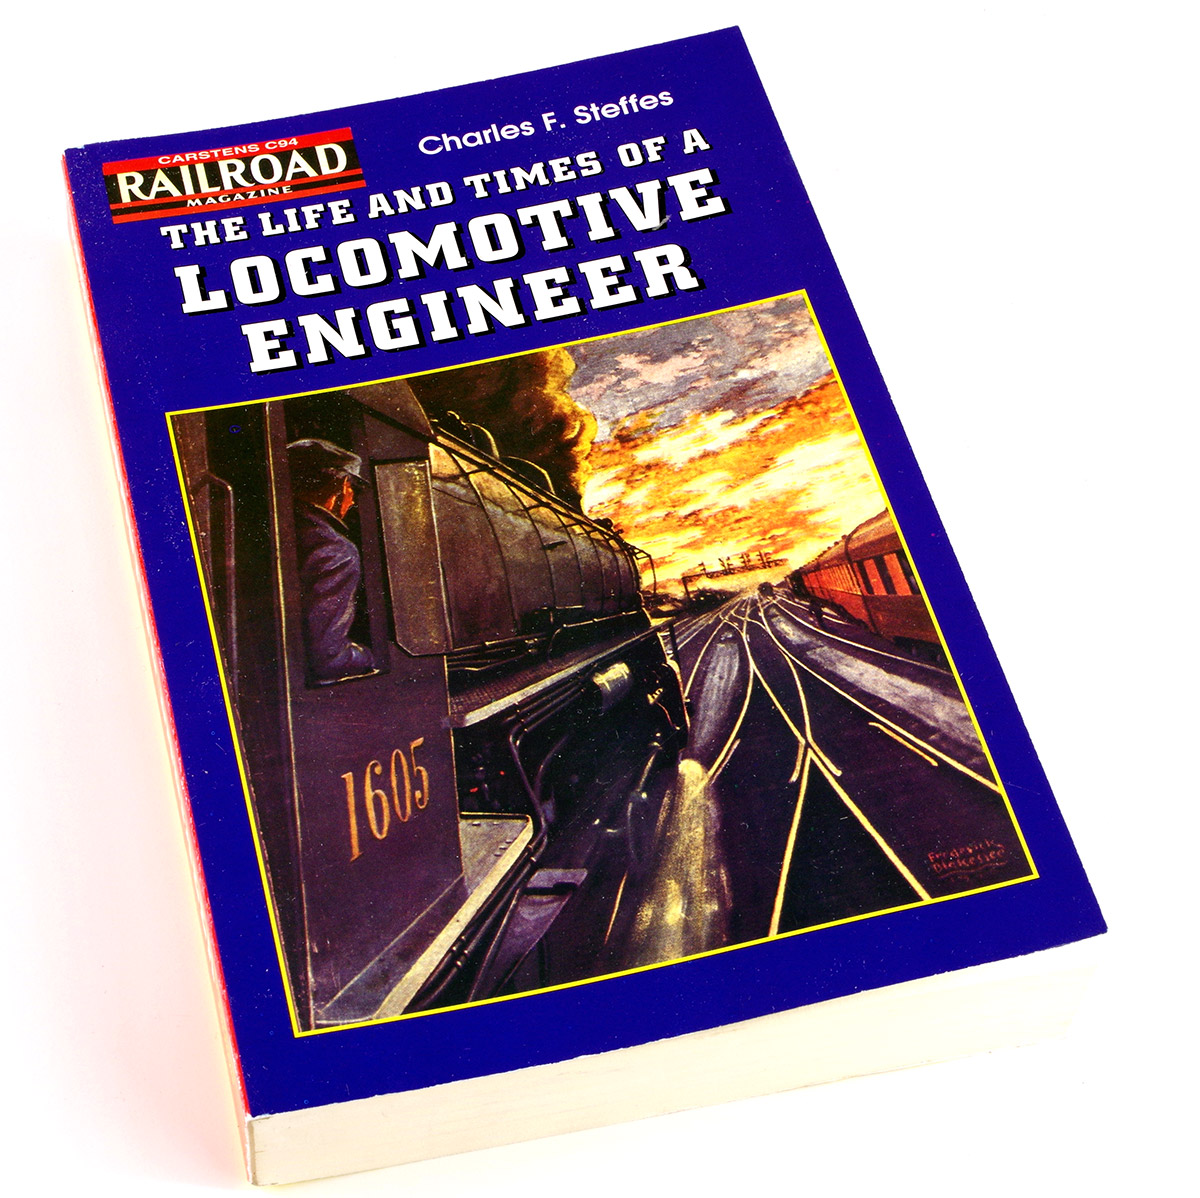  The Life and Times of a Locomotive Engineer  в продаже